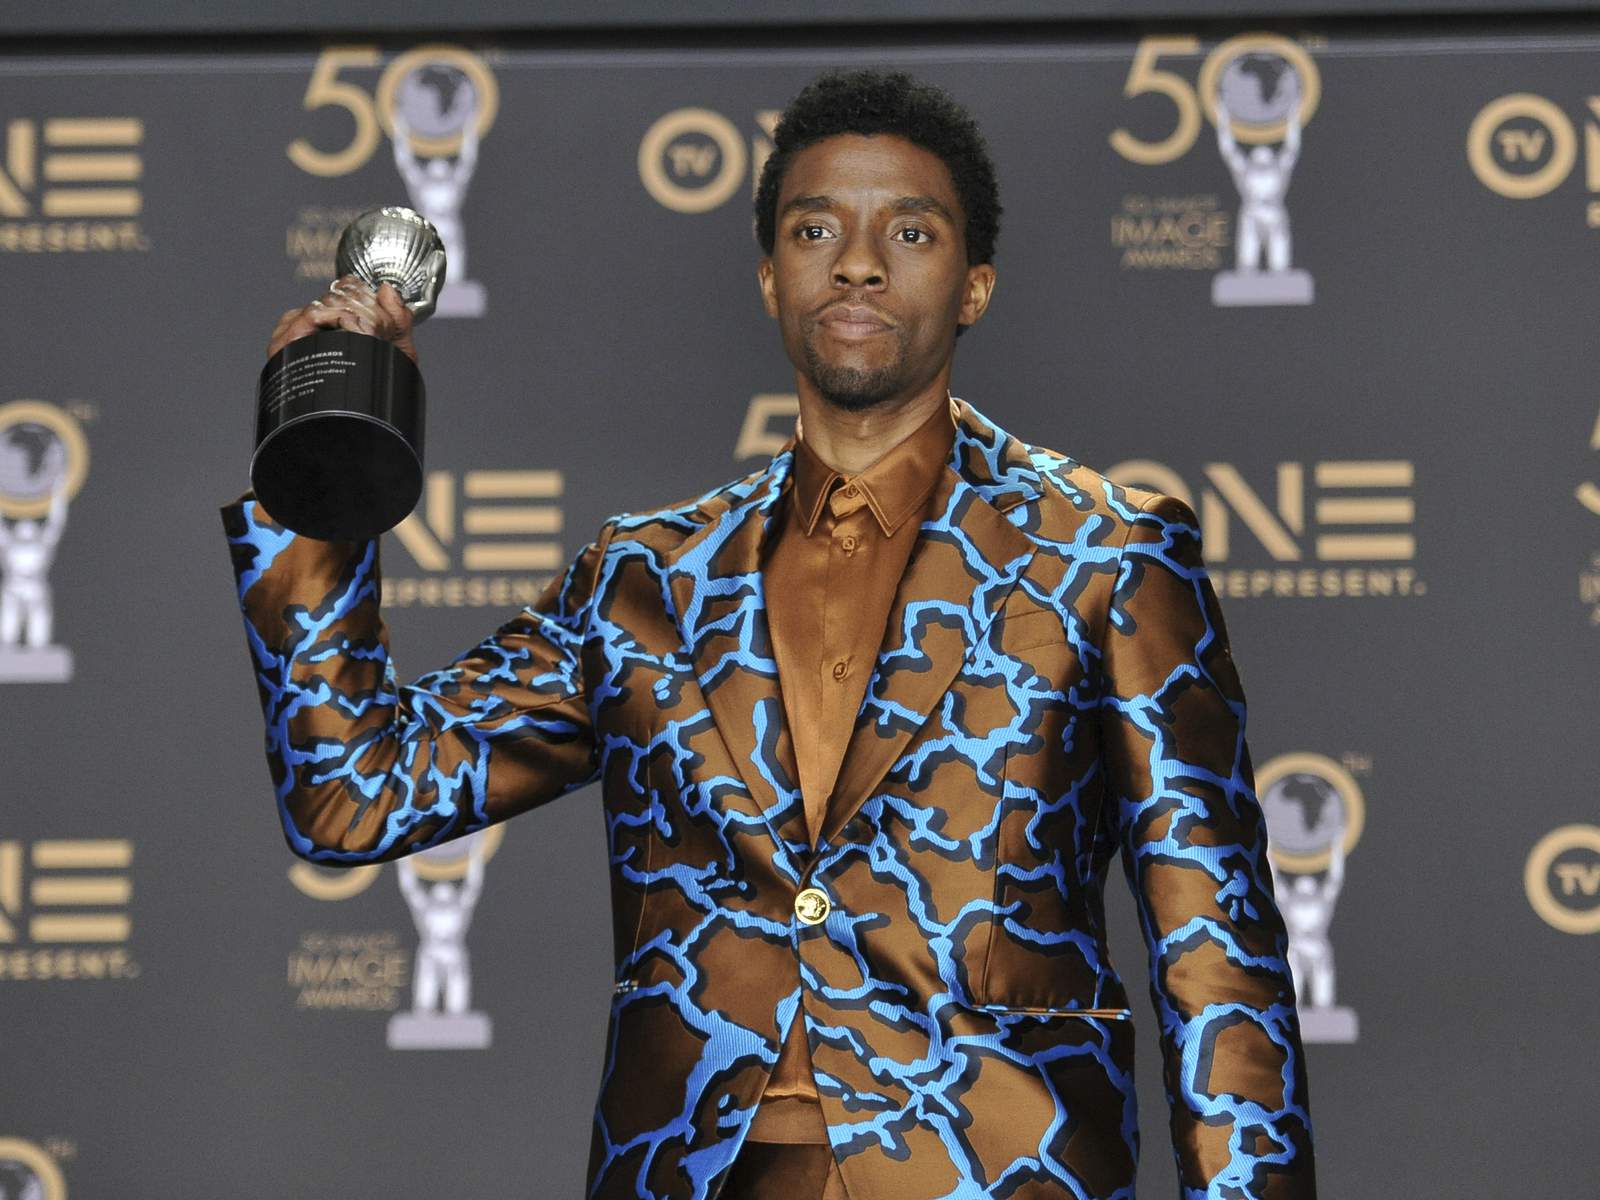 ‘Black Panther’ actor Chadwick Boseman dies at 43 after 4-year fight with colon cancer, representative tells AP